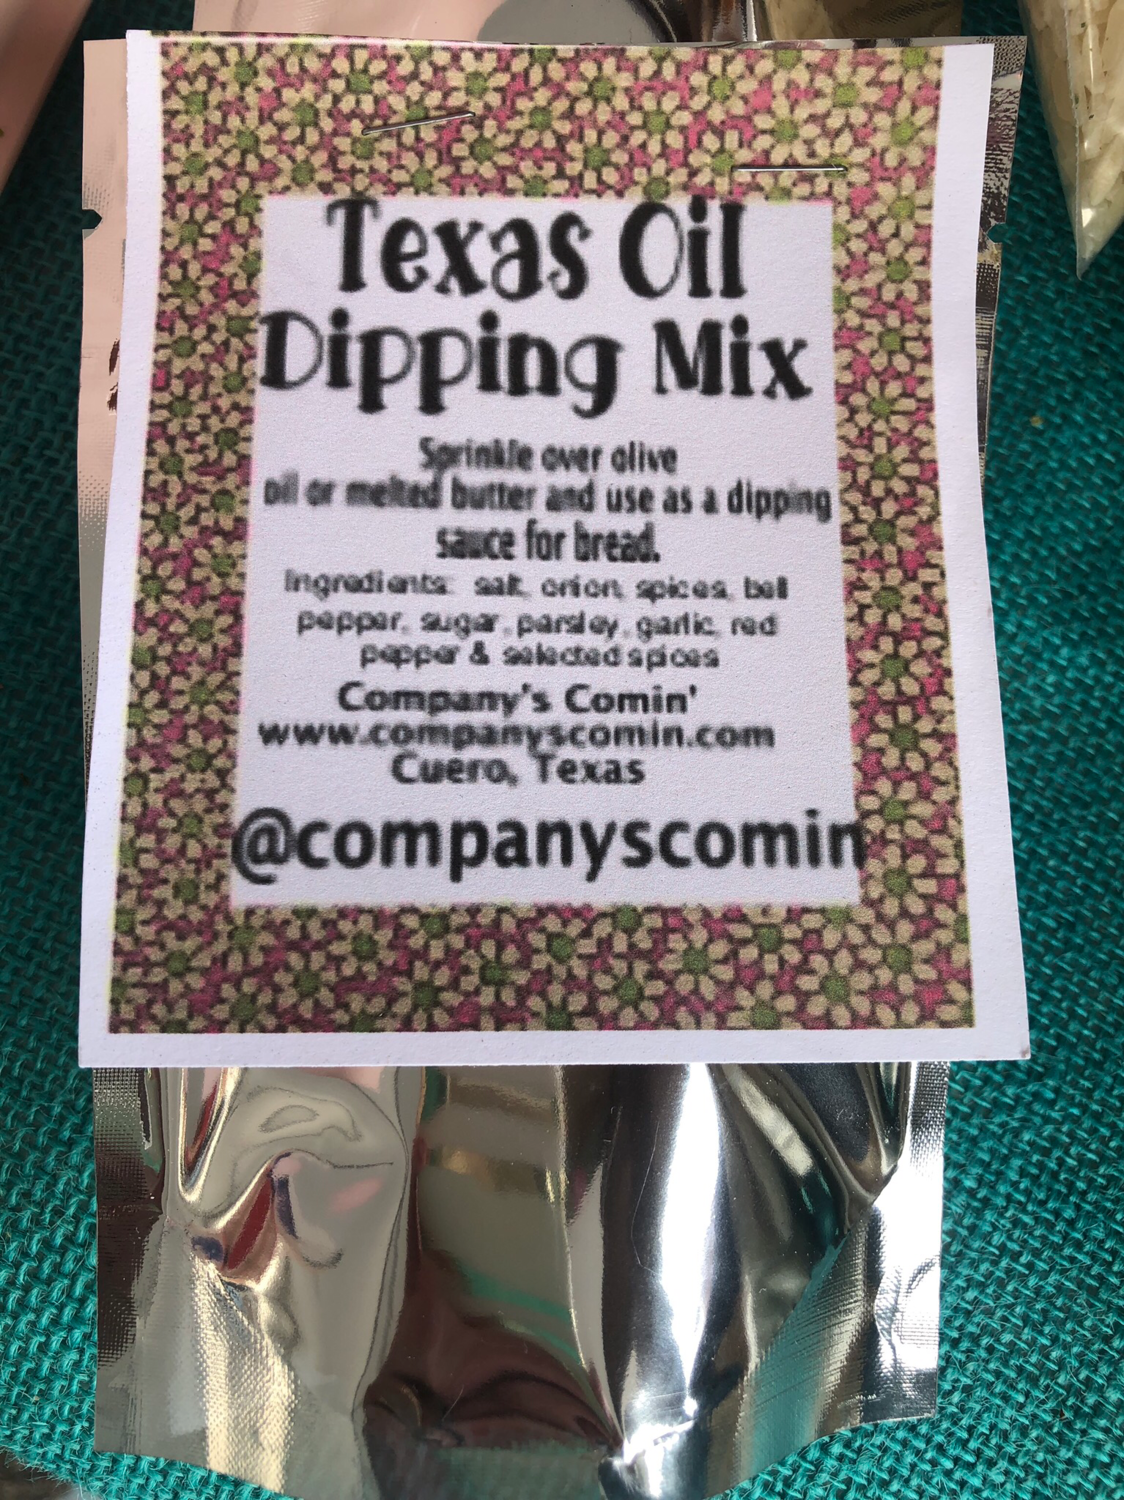 Texas Oil Dipping Mix